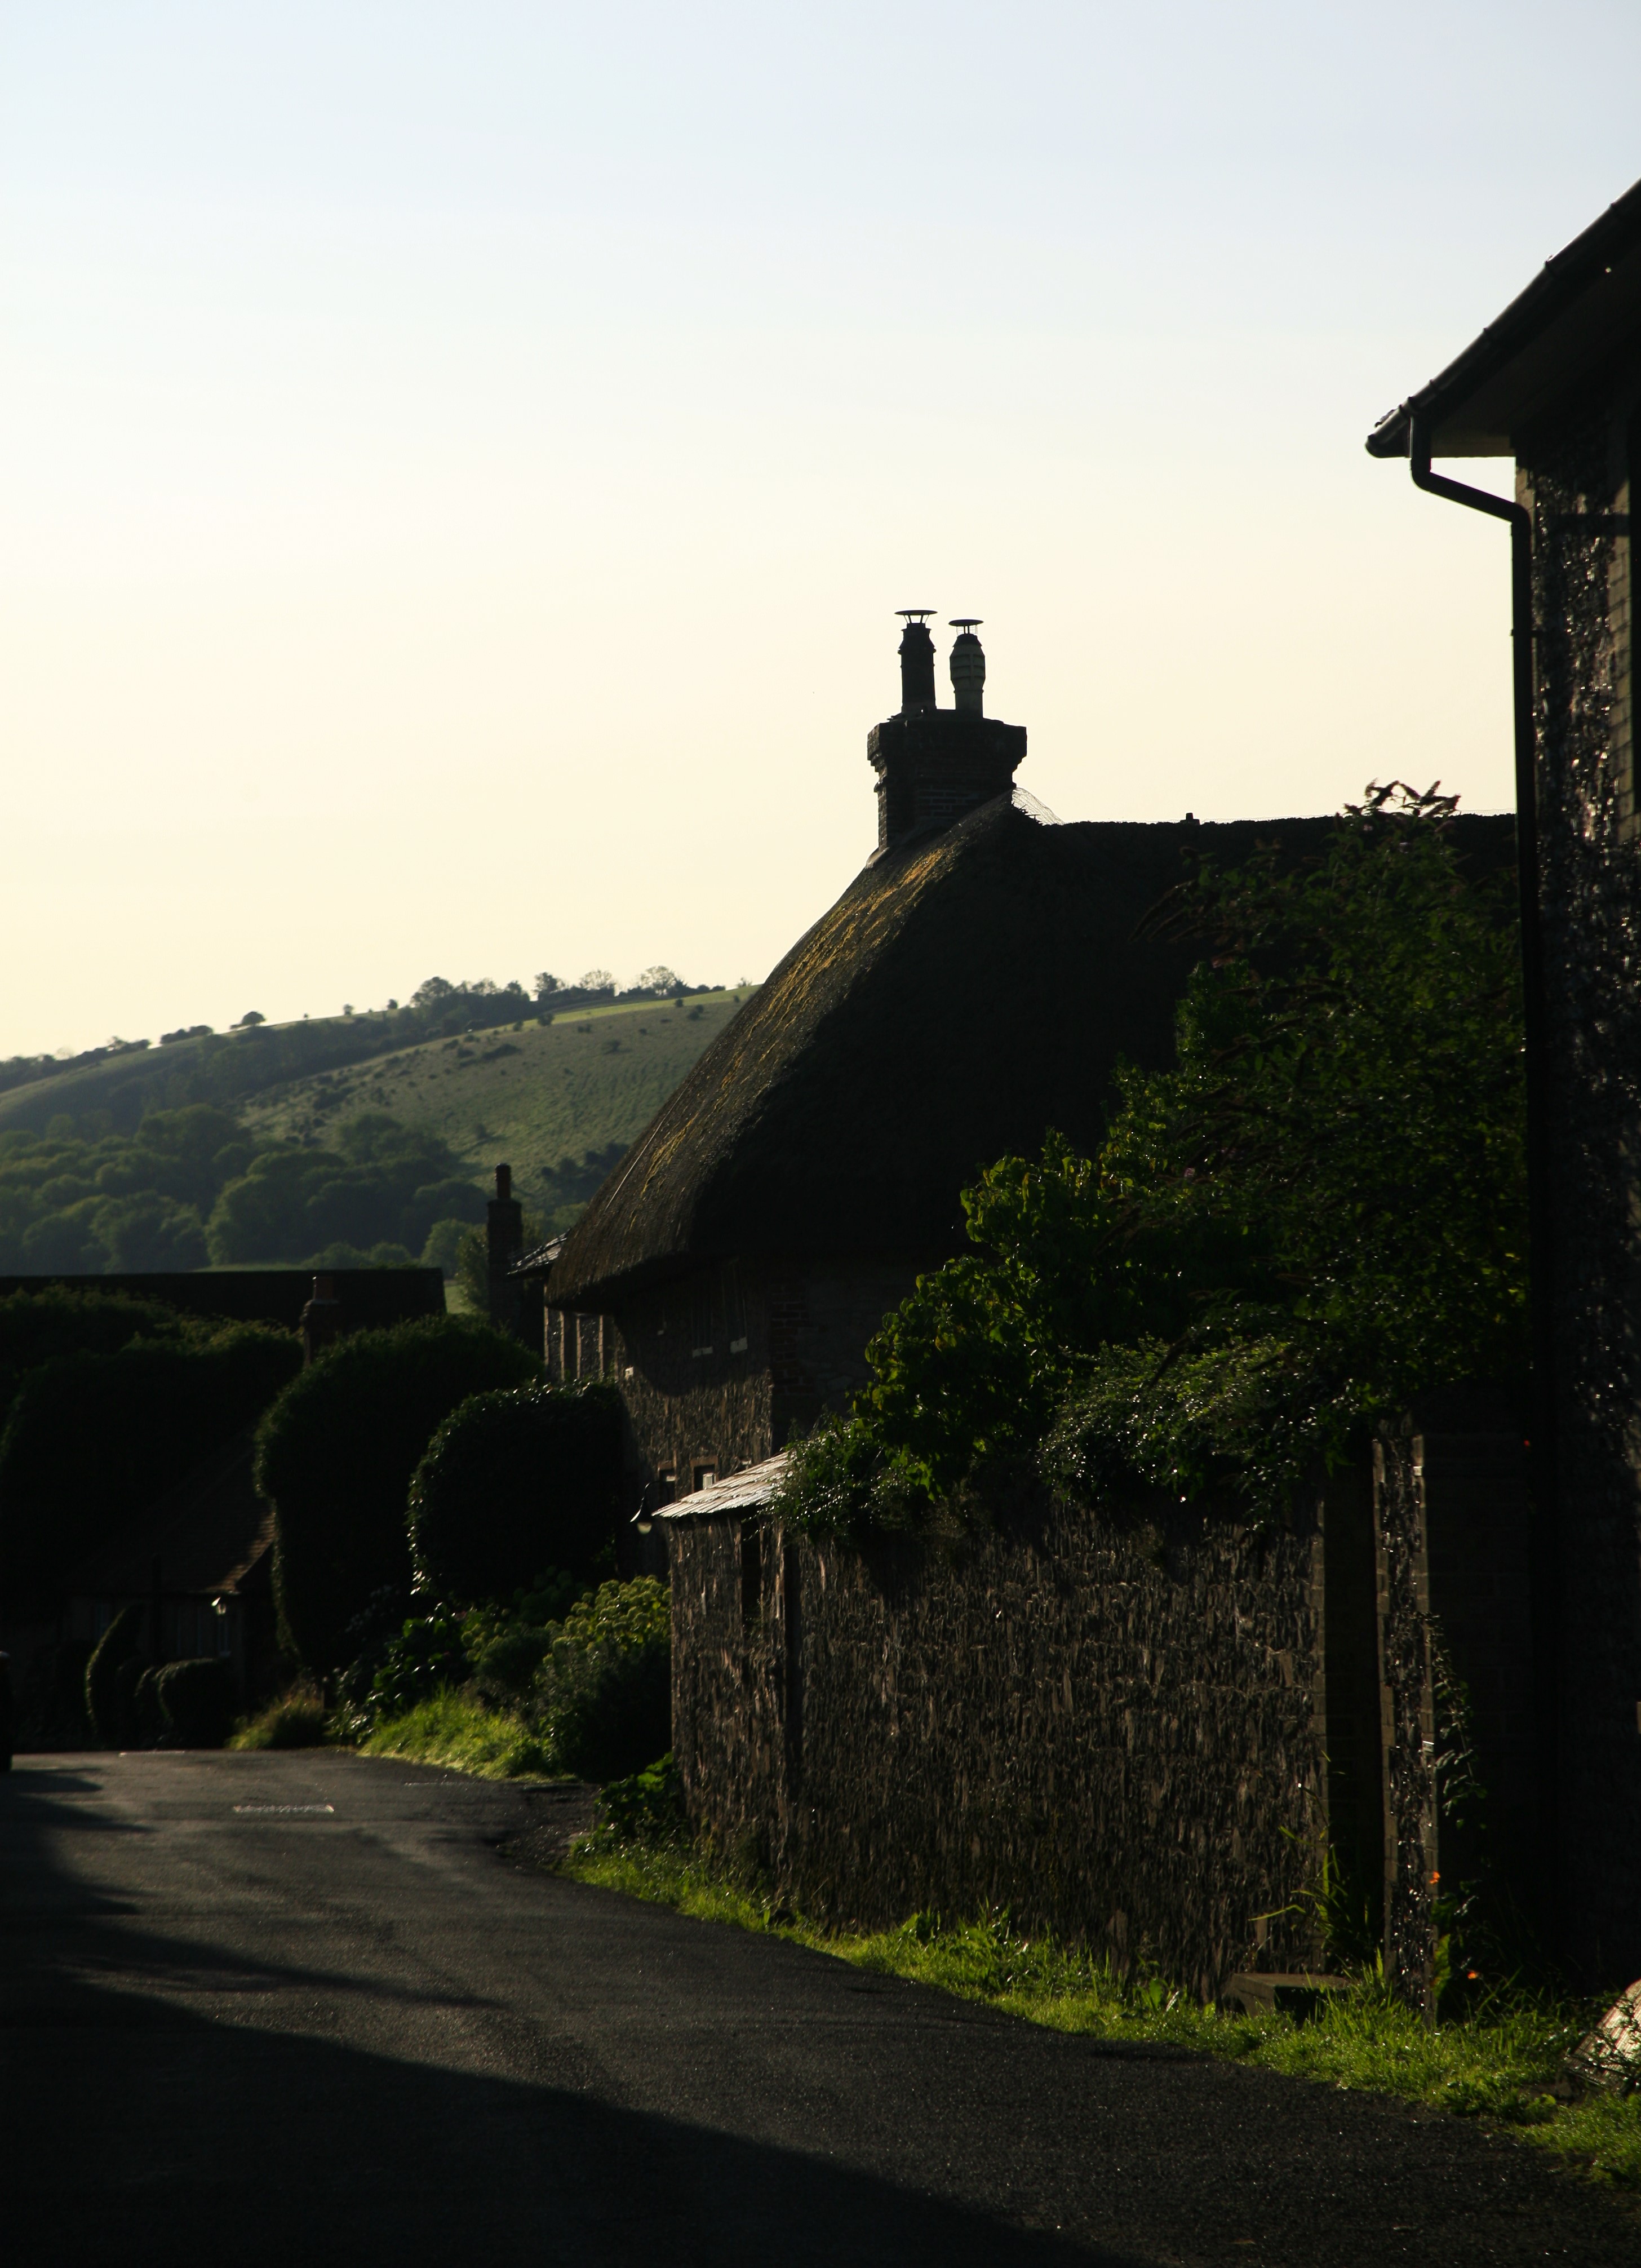 A road in a quaint English village in the late afternoon